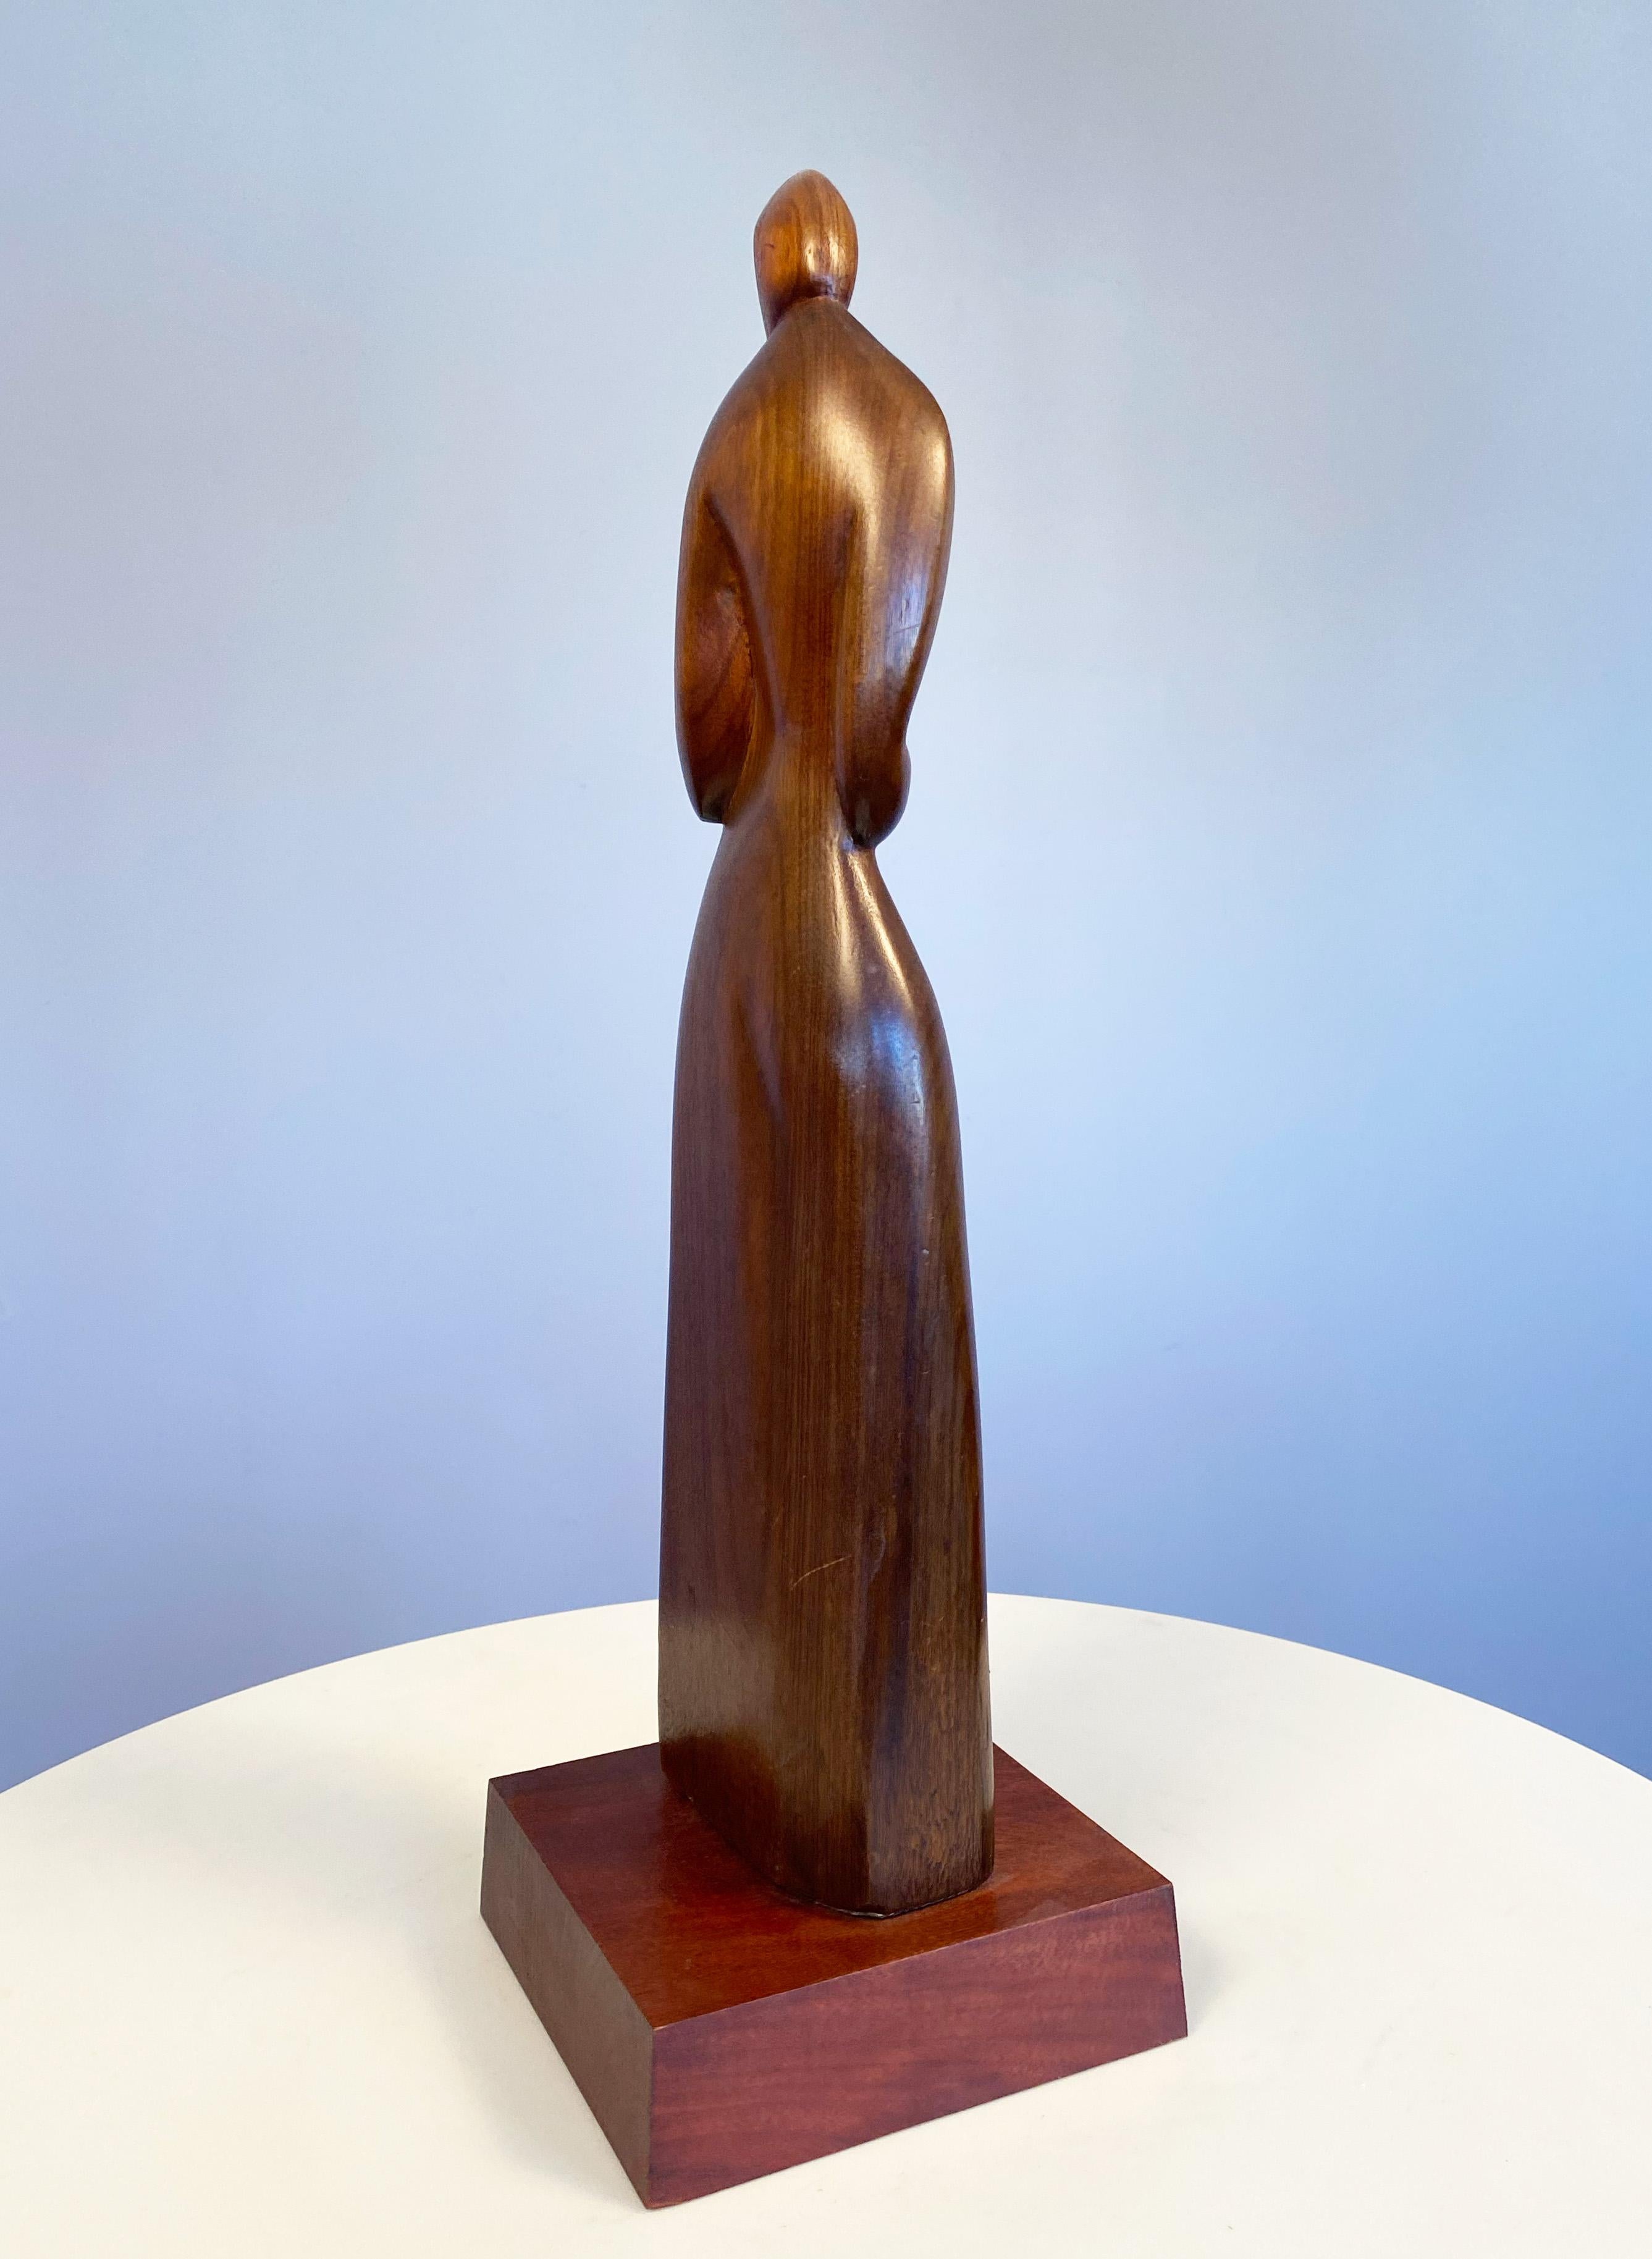 Joseph Goethe was one of our finest American modernist carvers in wood.  He loved to use exotic and or beautiful woods to inspire his compositions which ranged from figurative, to animal or aviary in form - to completely abstract.  In this piece he